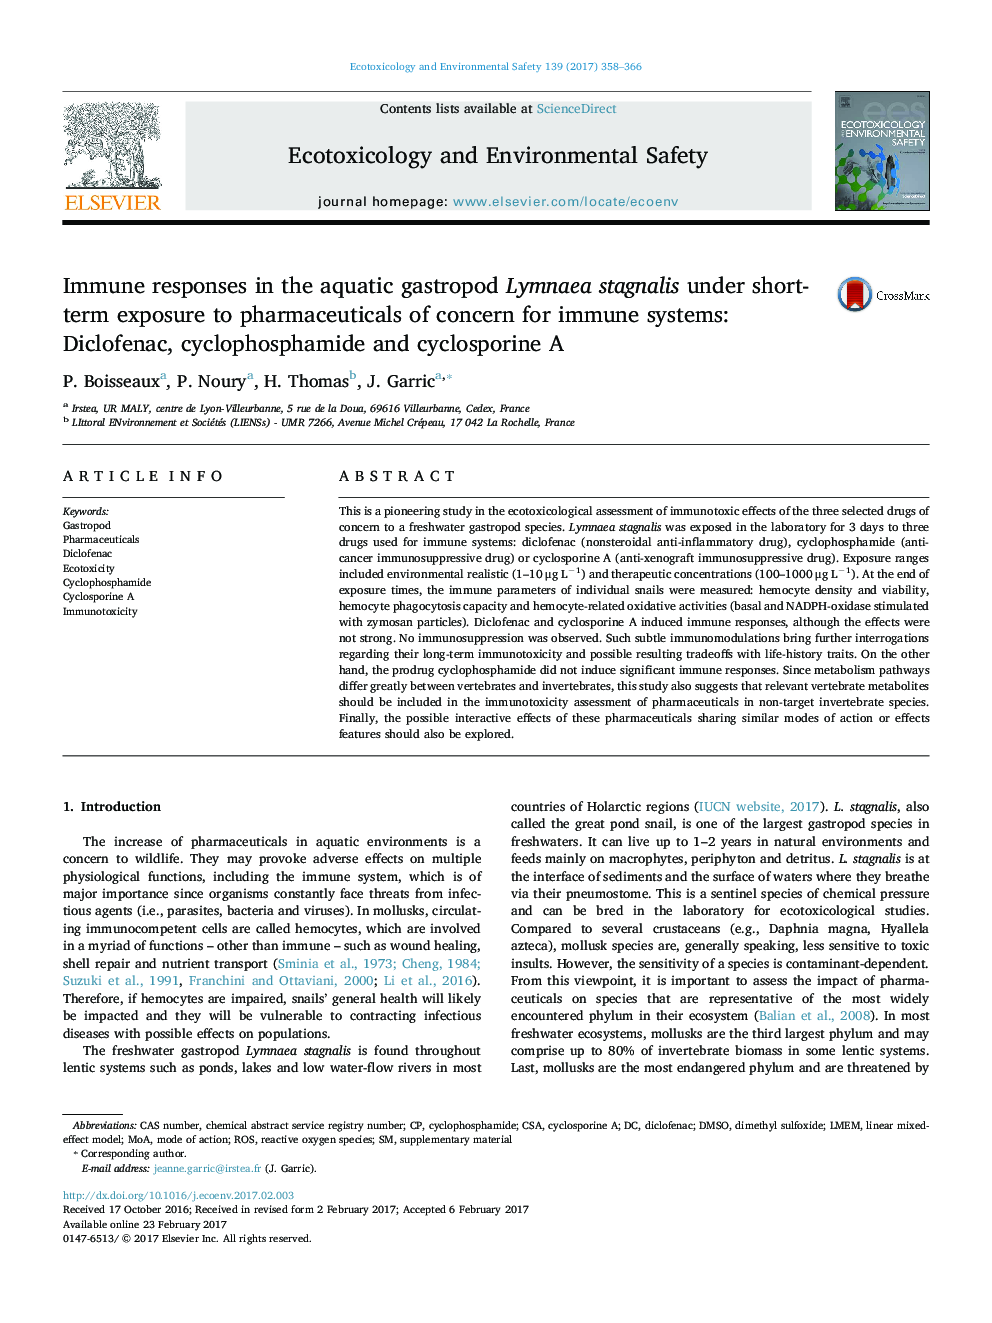 Immune responses in the aquatic gastropod Lymnaea stagnalis under short-term exposure to pharmaceuticals of concern for immune systems: Diclofenac, cyclophosphamide and cyclosporine A